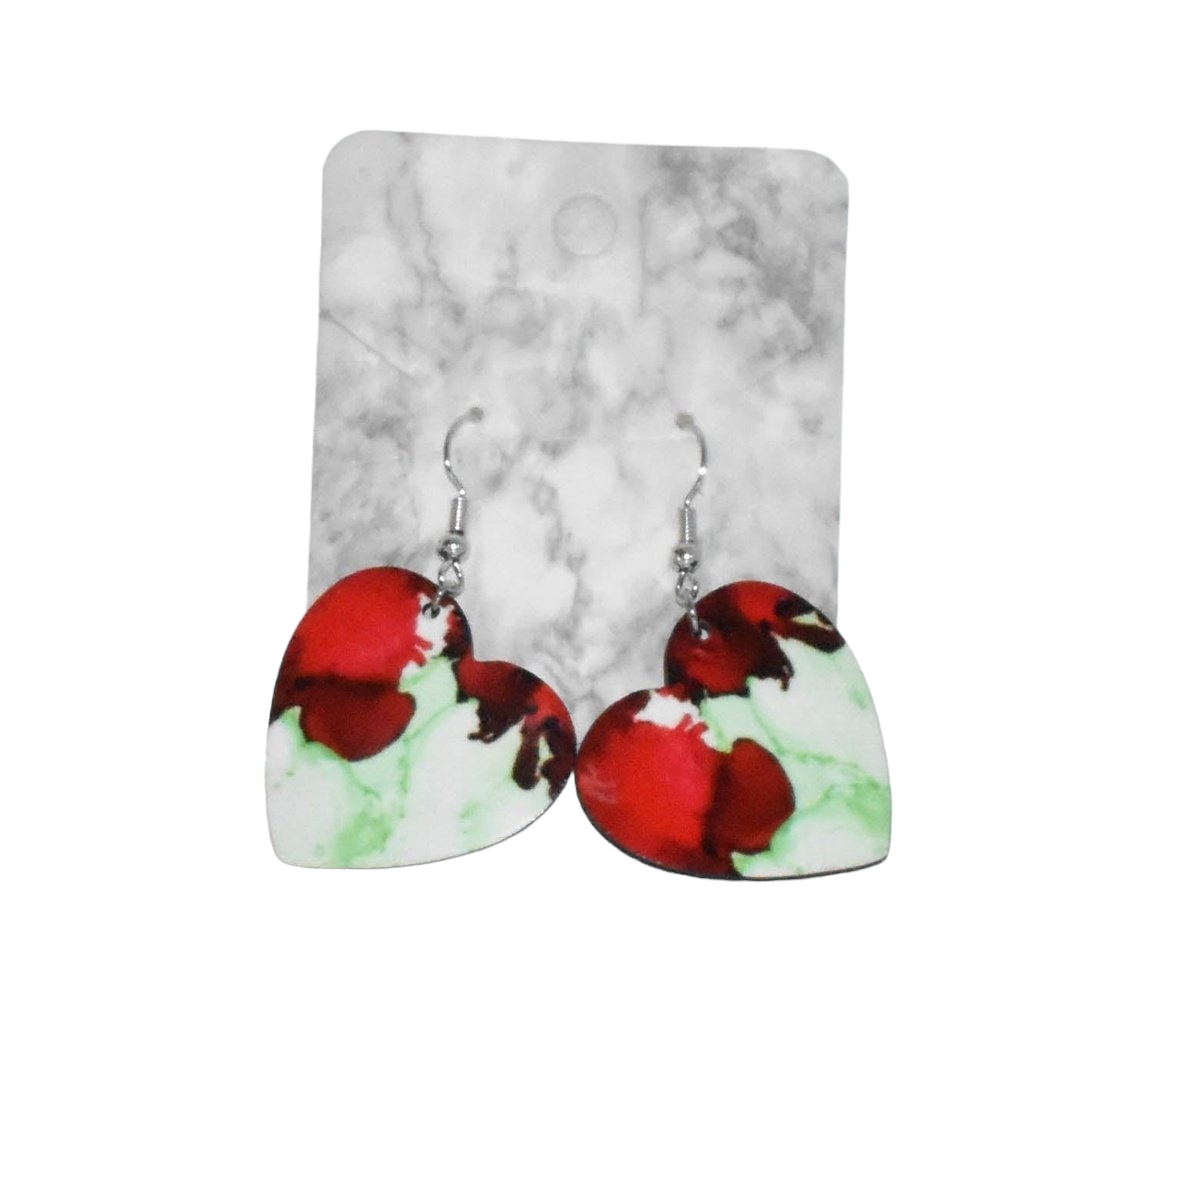 Cute and Colorful Earrings